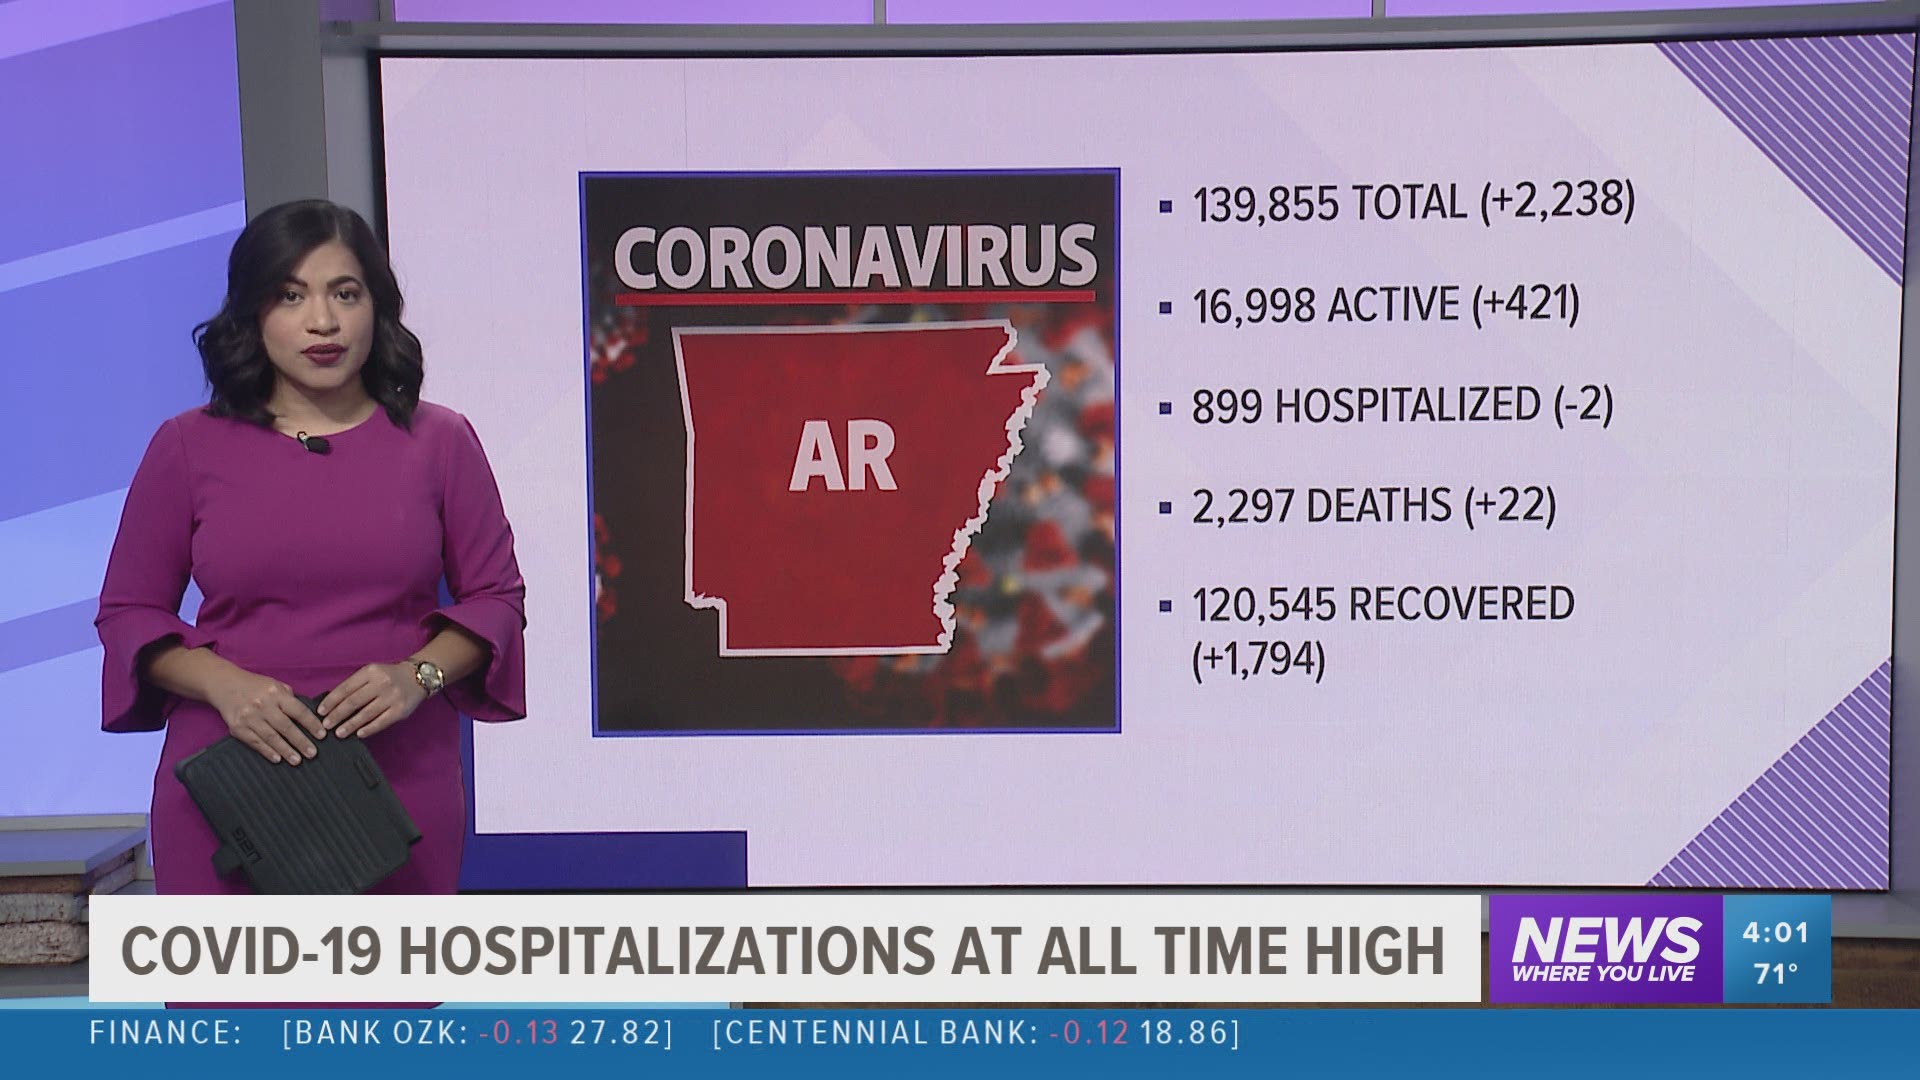 A look at the latest case numbers for the coronavirus in Arkansas on Thursday, November 19. https://bit.ly/3iqGRnx